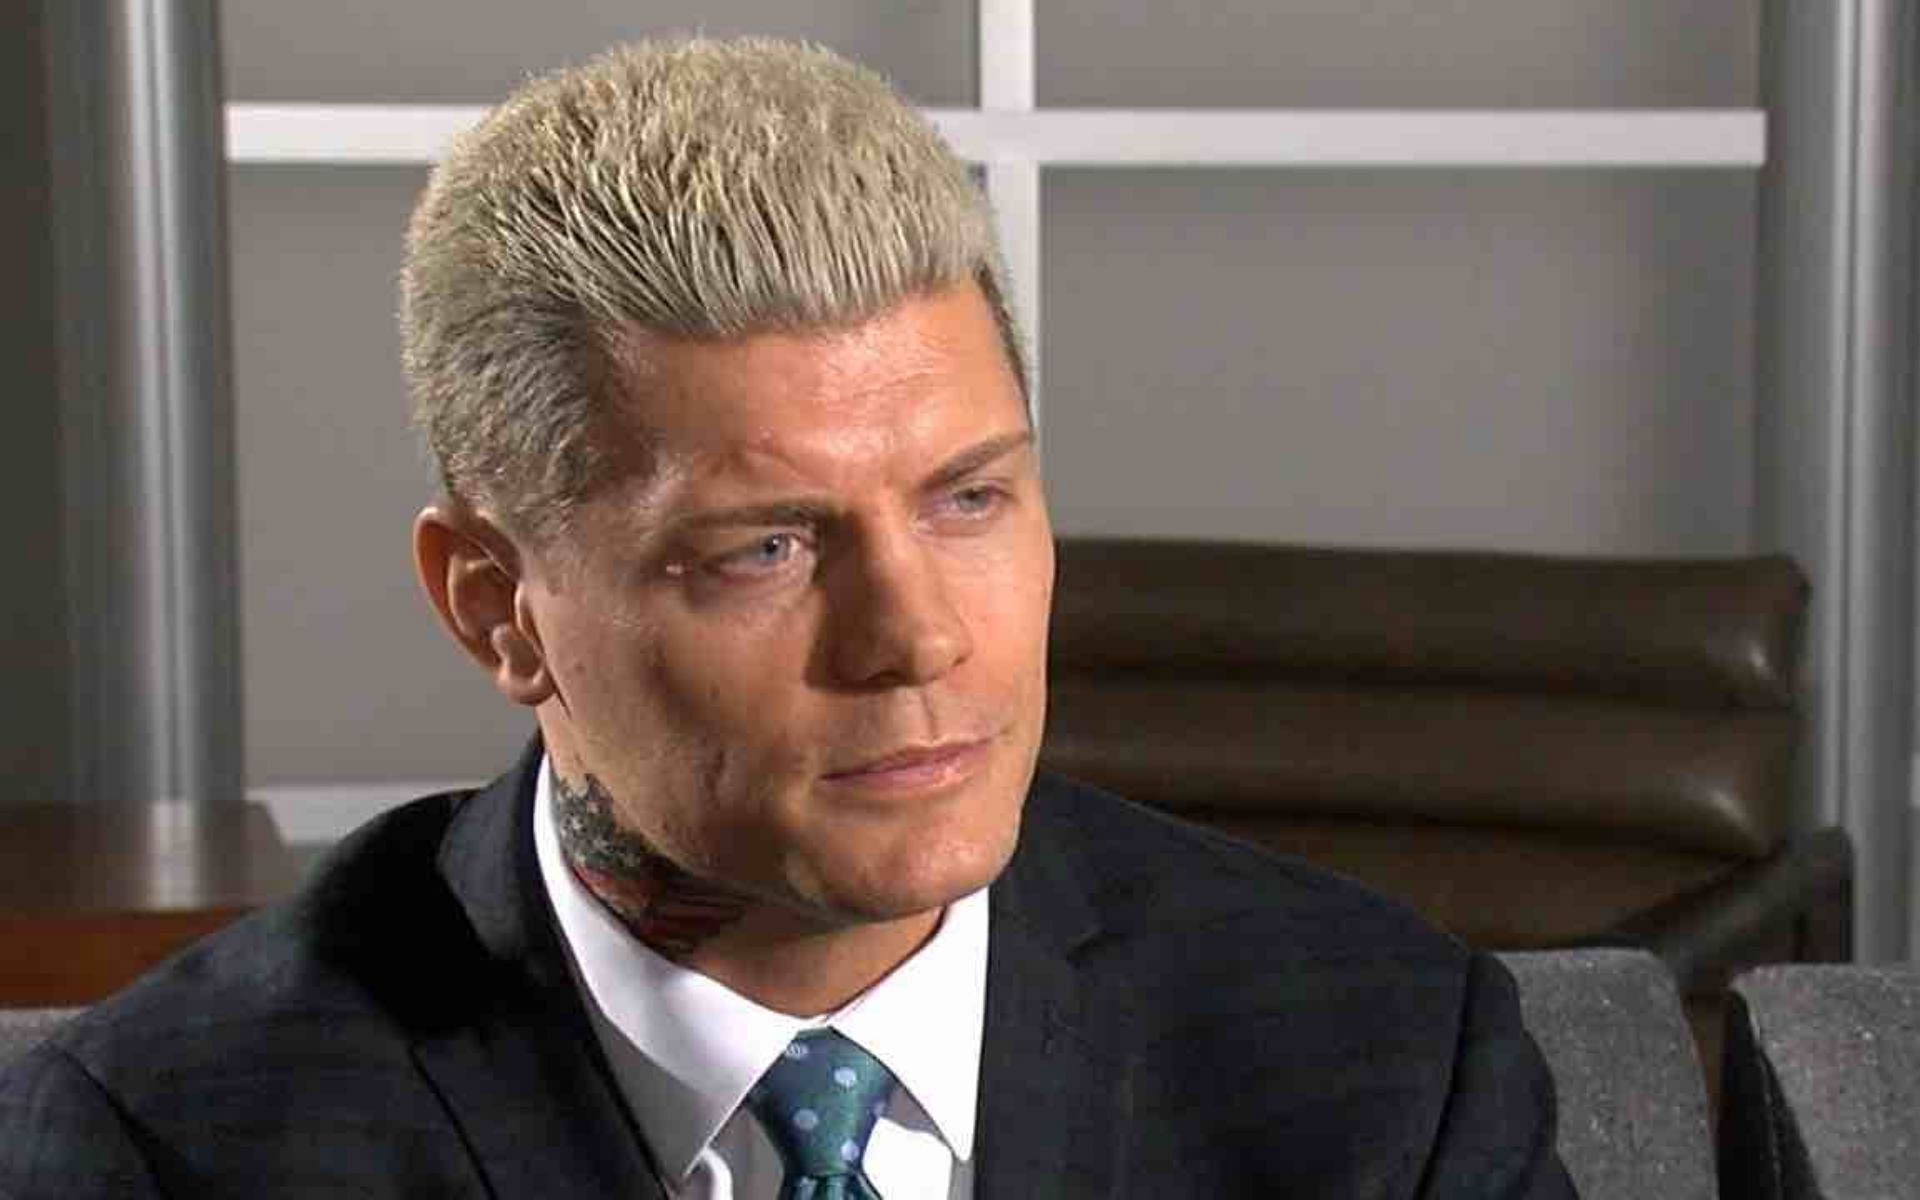 Cody Rhodes has had an amazing wrestling career since his first job